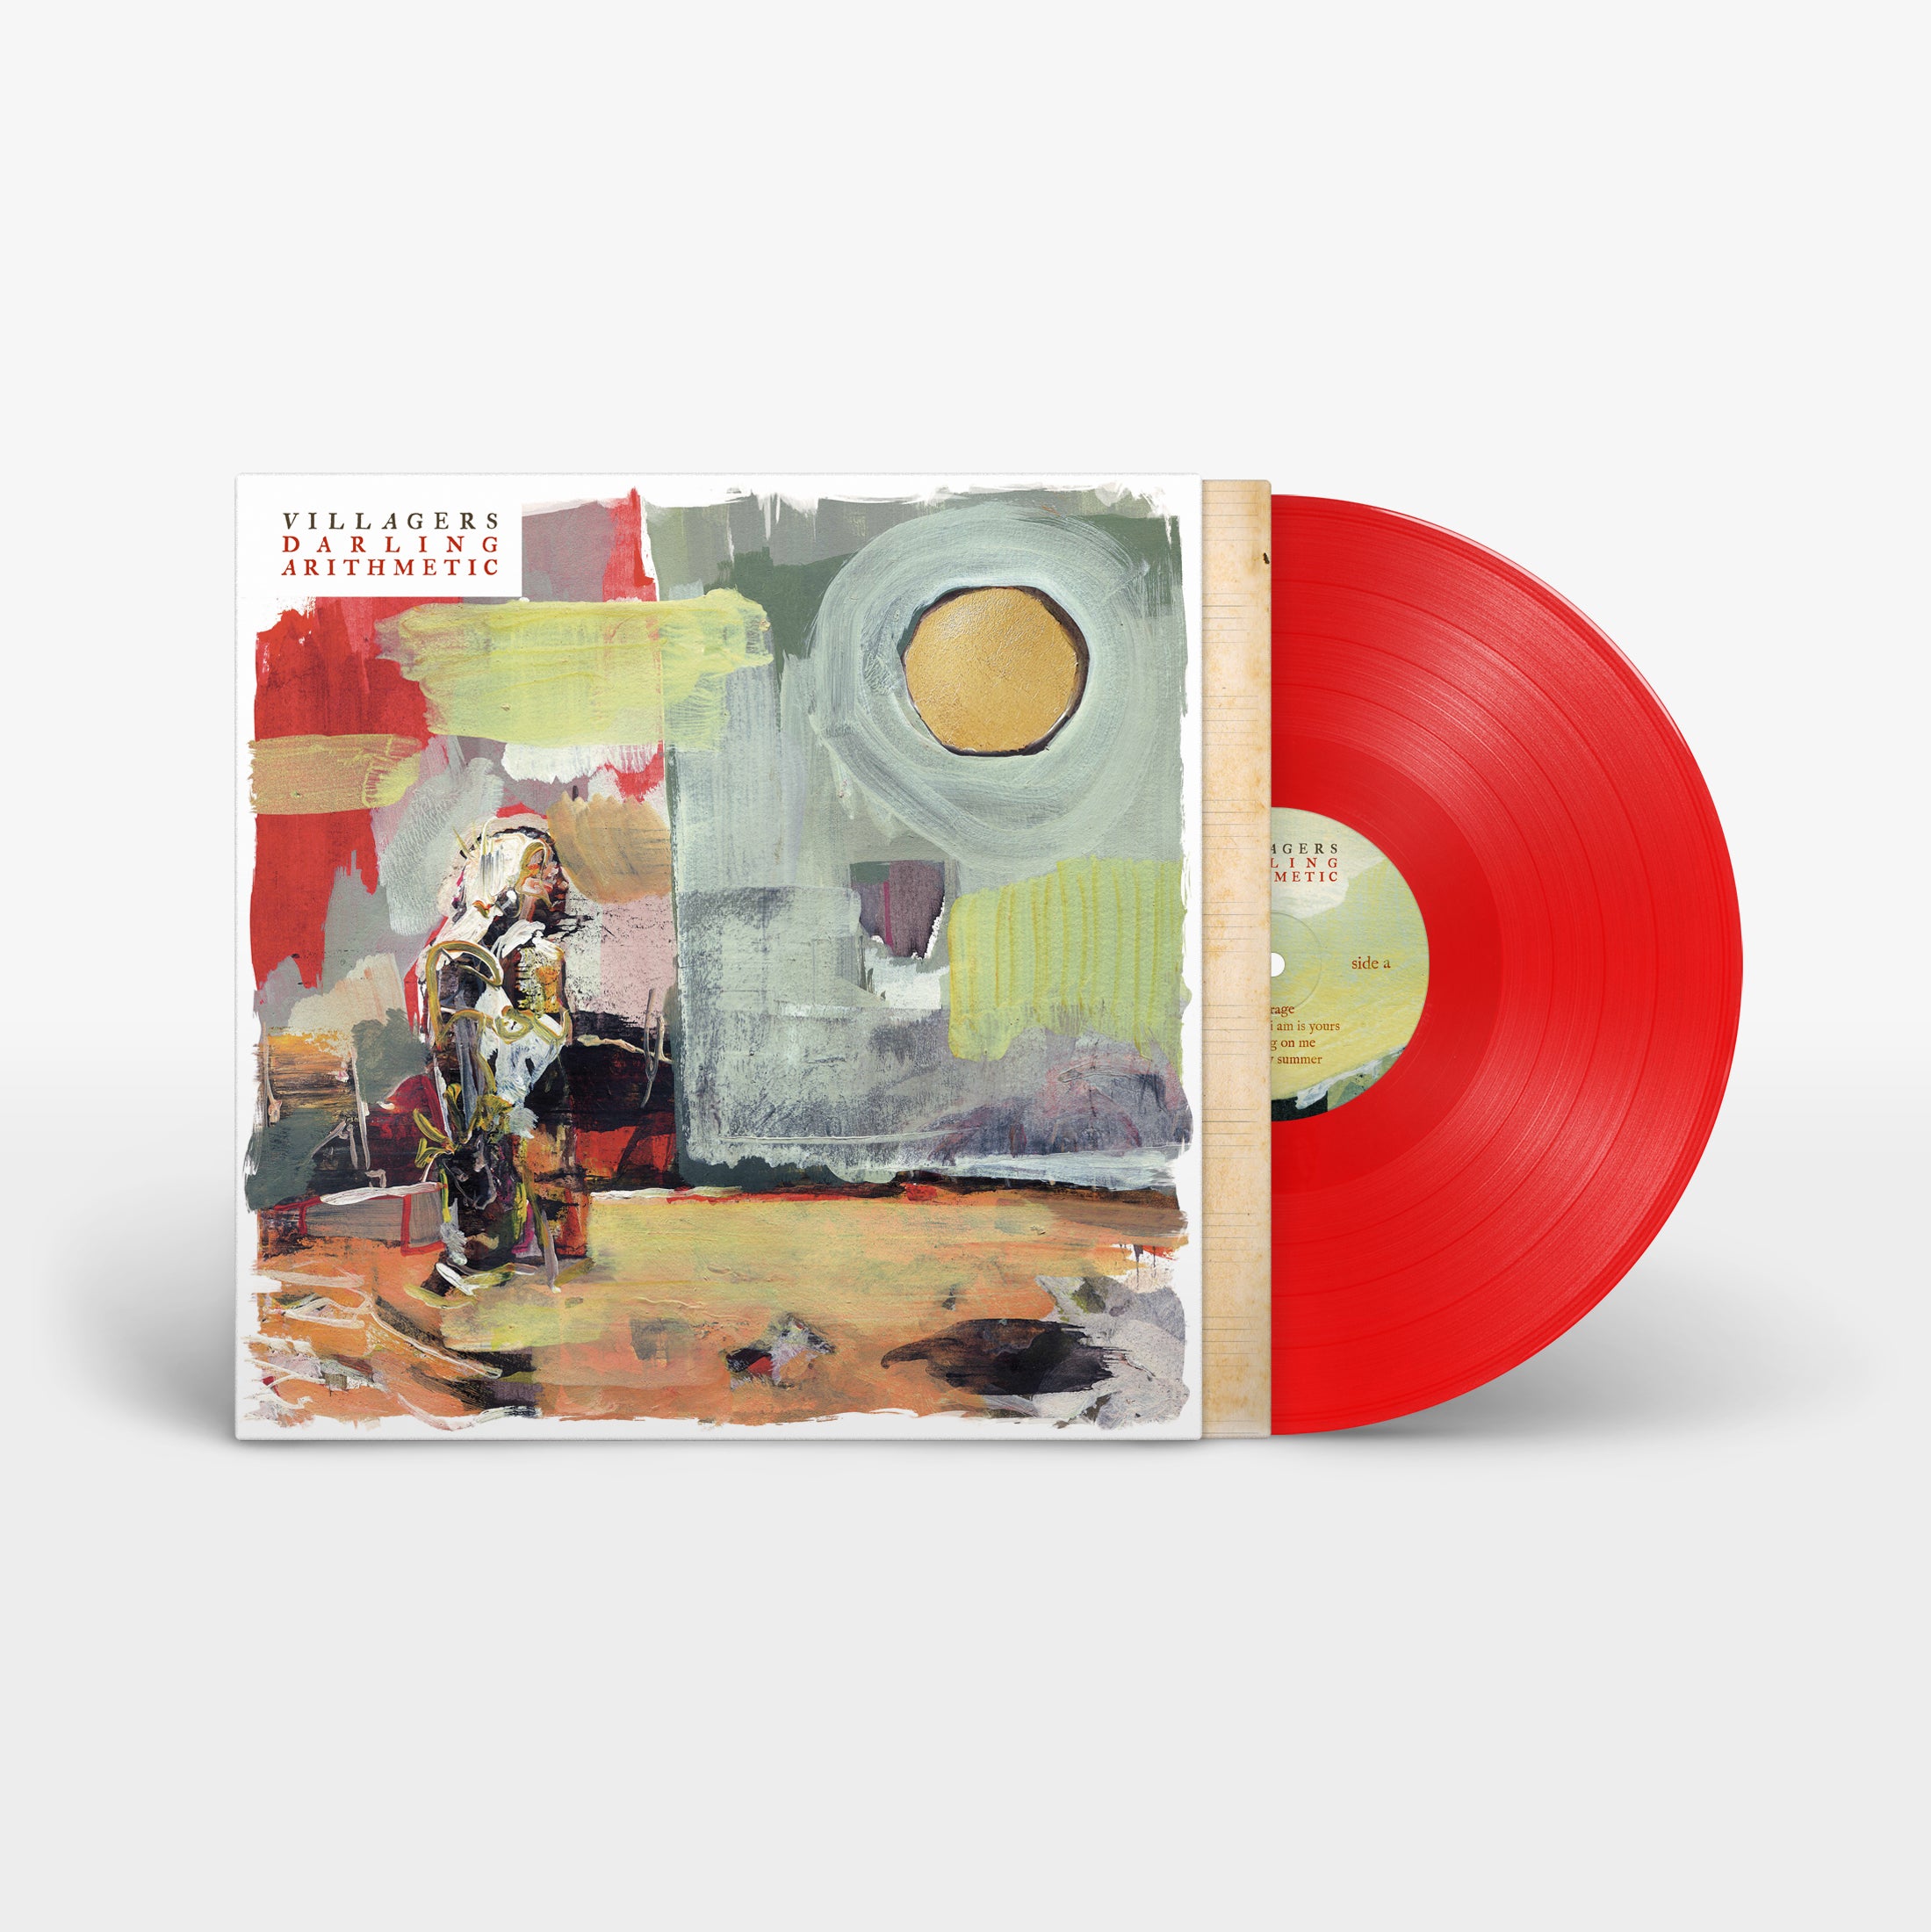 Villagers - Darling Arithmetic: Limited Red Vinyl LP